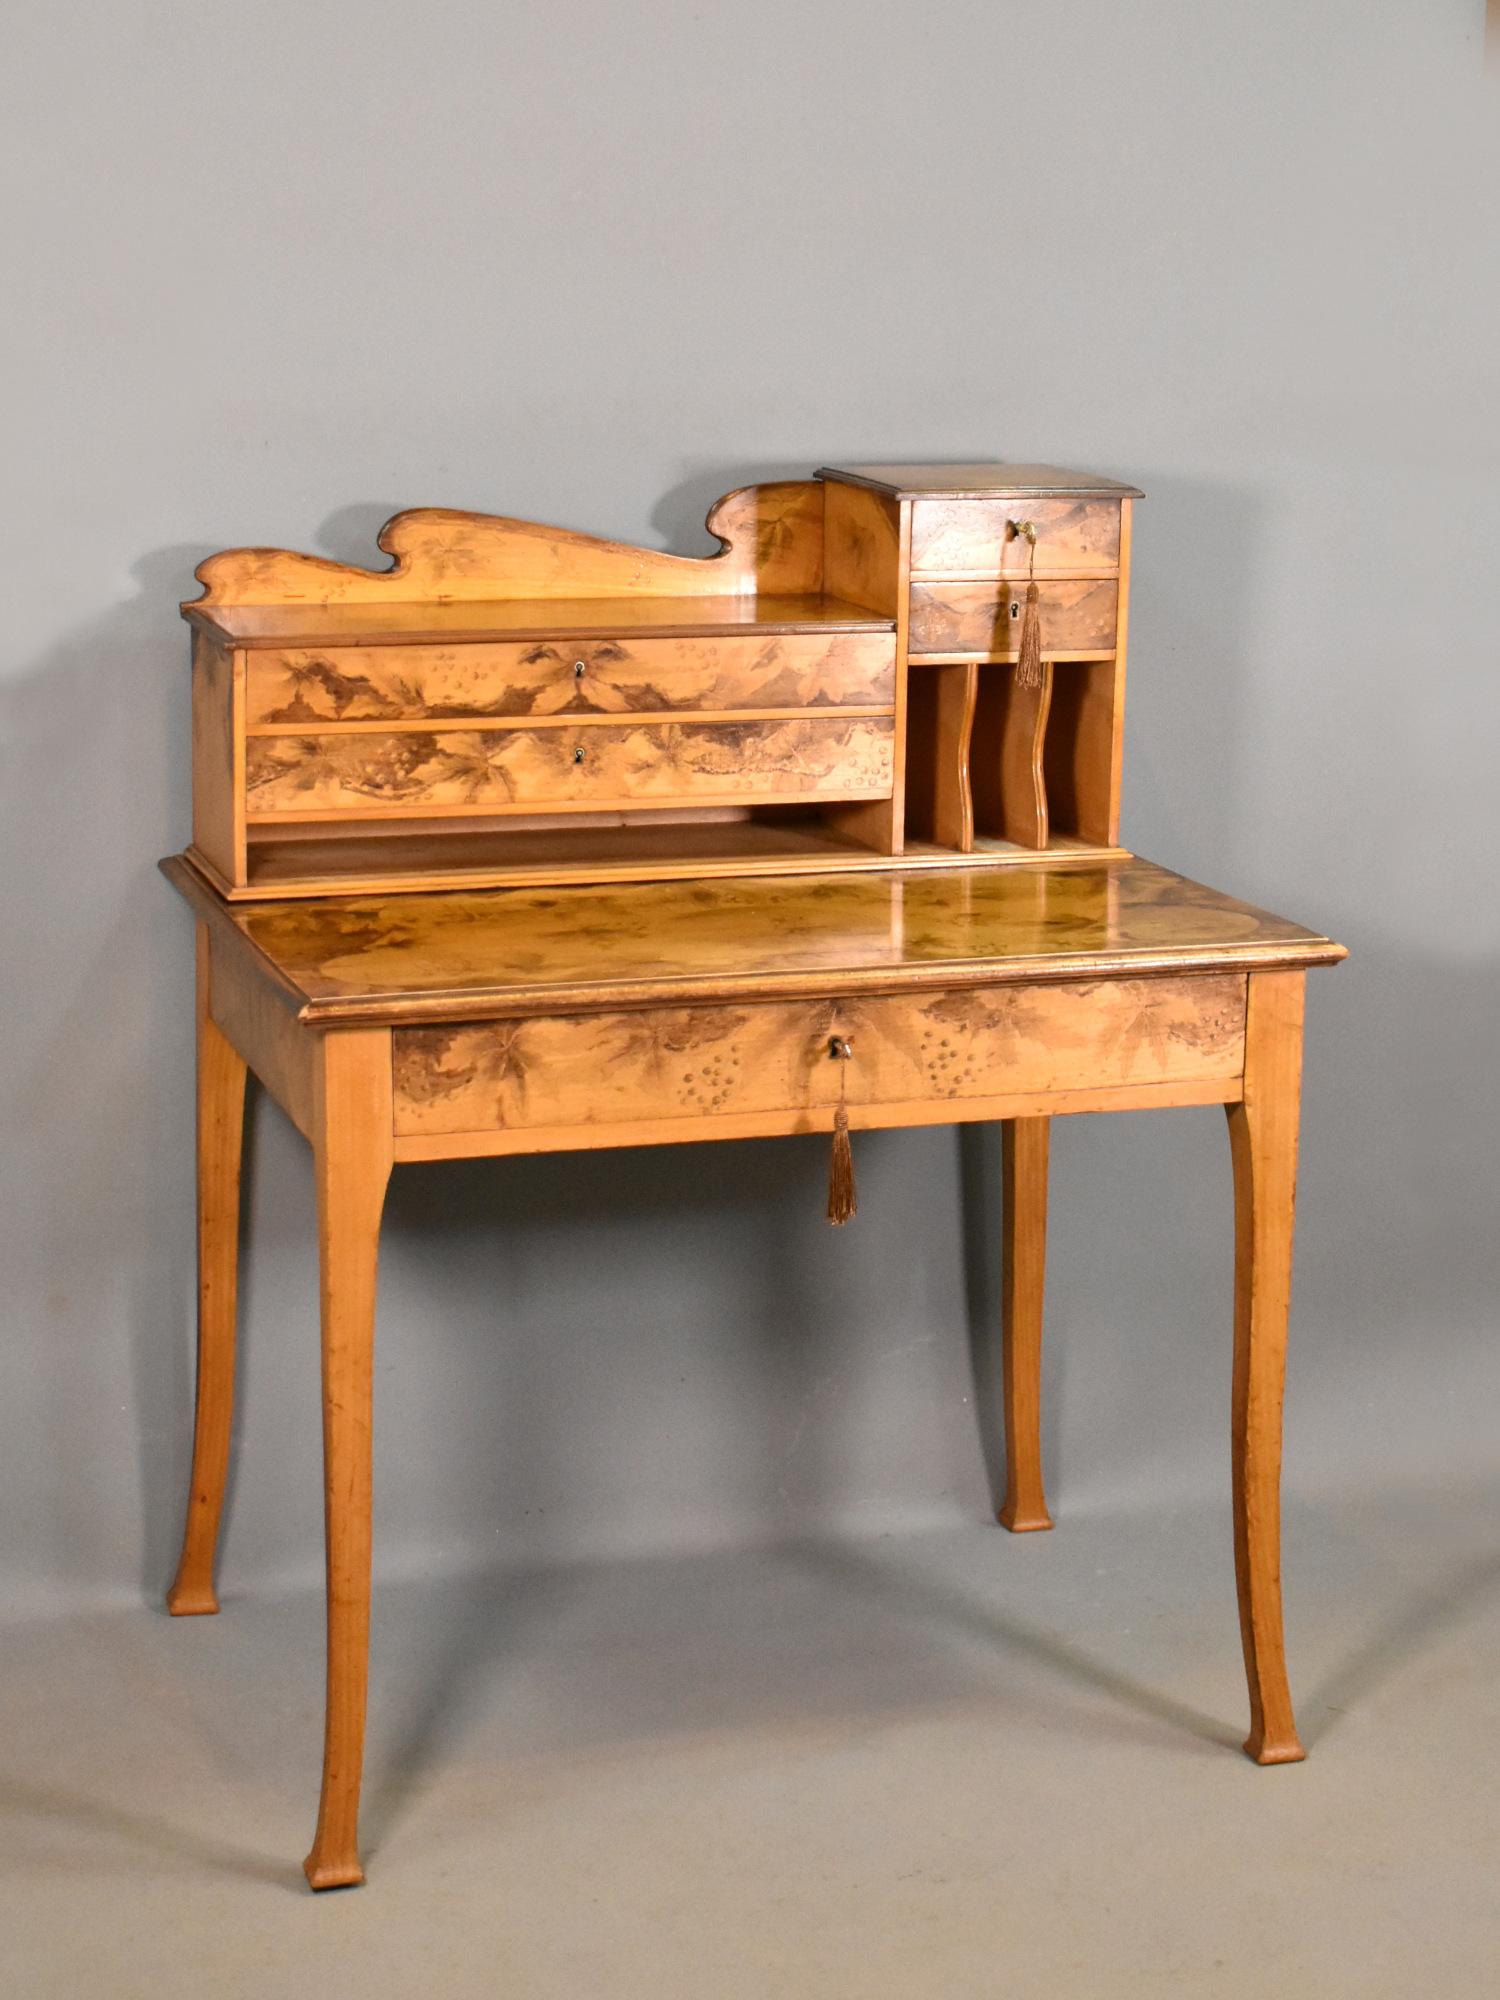 Art Nouveau Tiered Pyrography Etched Desk

This stunning Art Nouveau Desk is decorated profusely with pyrography etchings depicting country scenes, including vines, windmills, boats and floral motifs. 

The freestanding smaller storage section